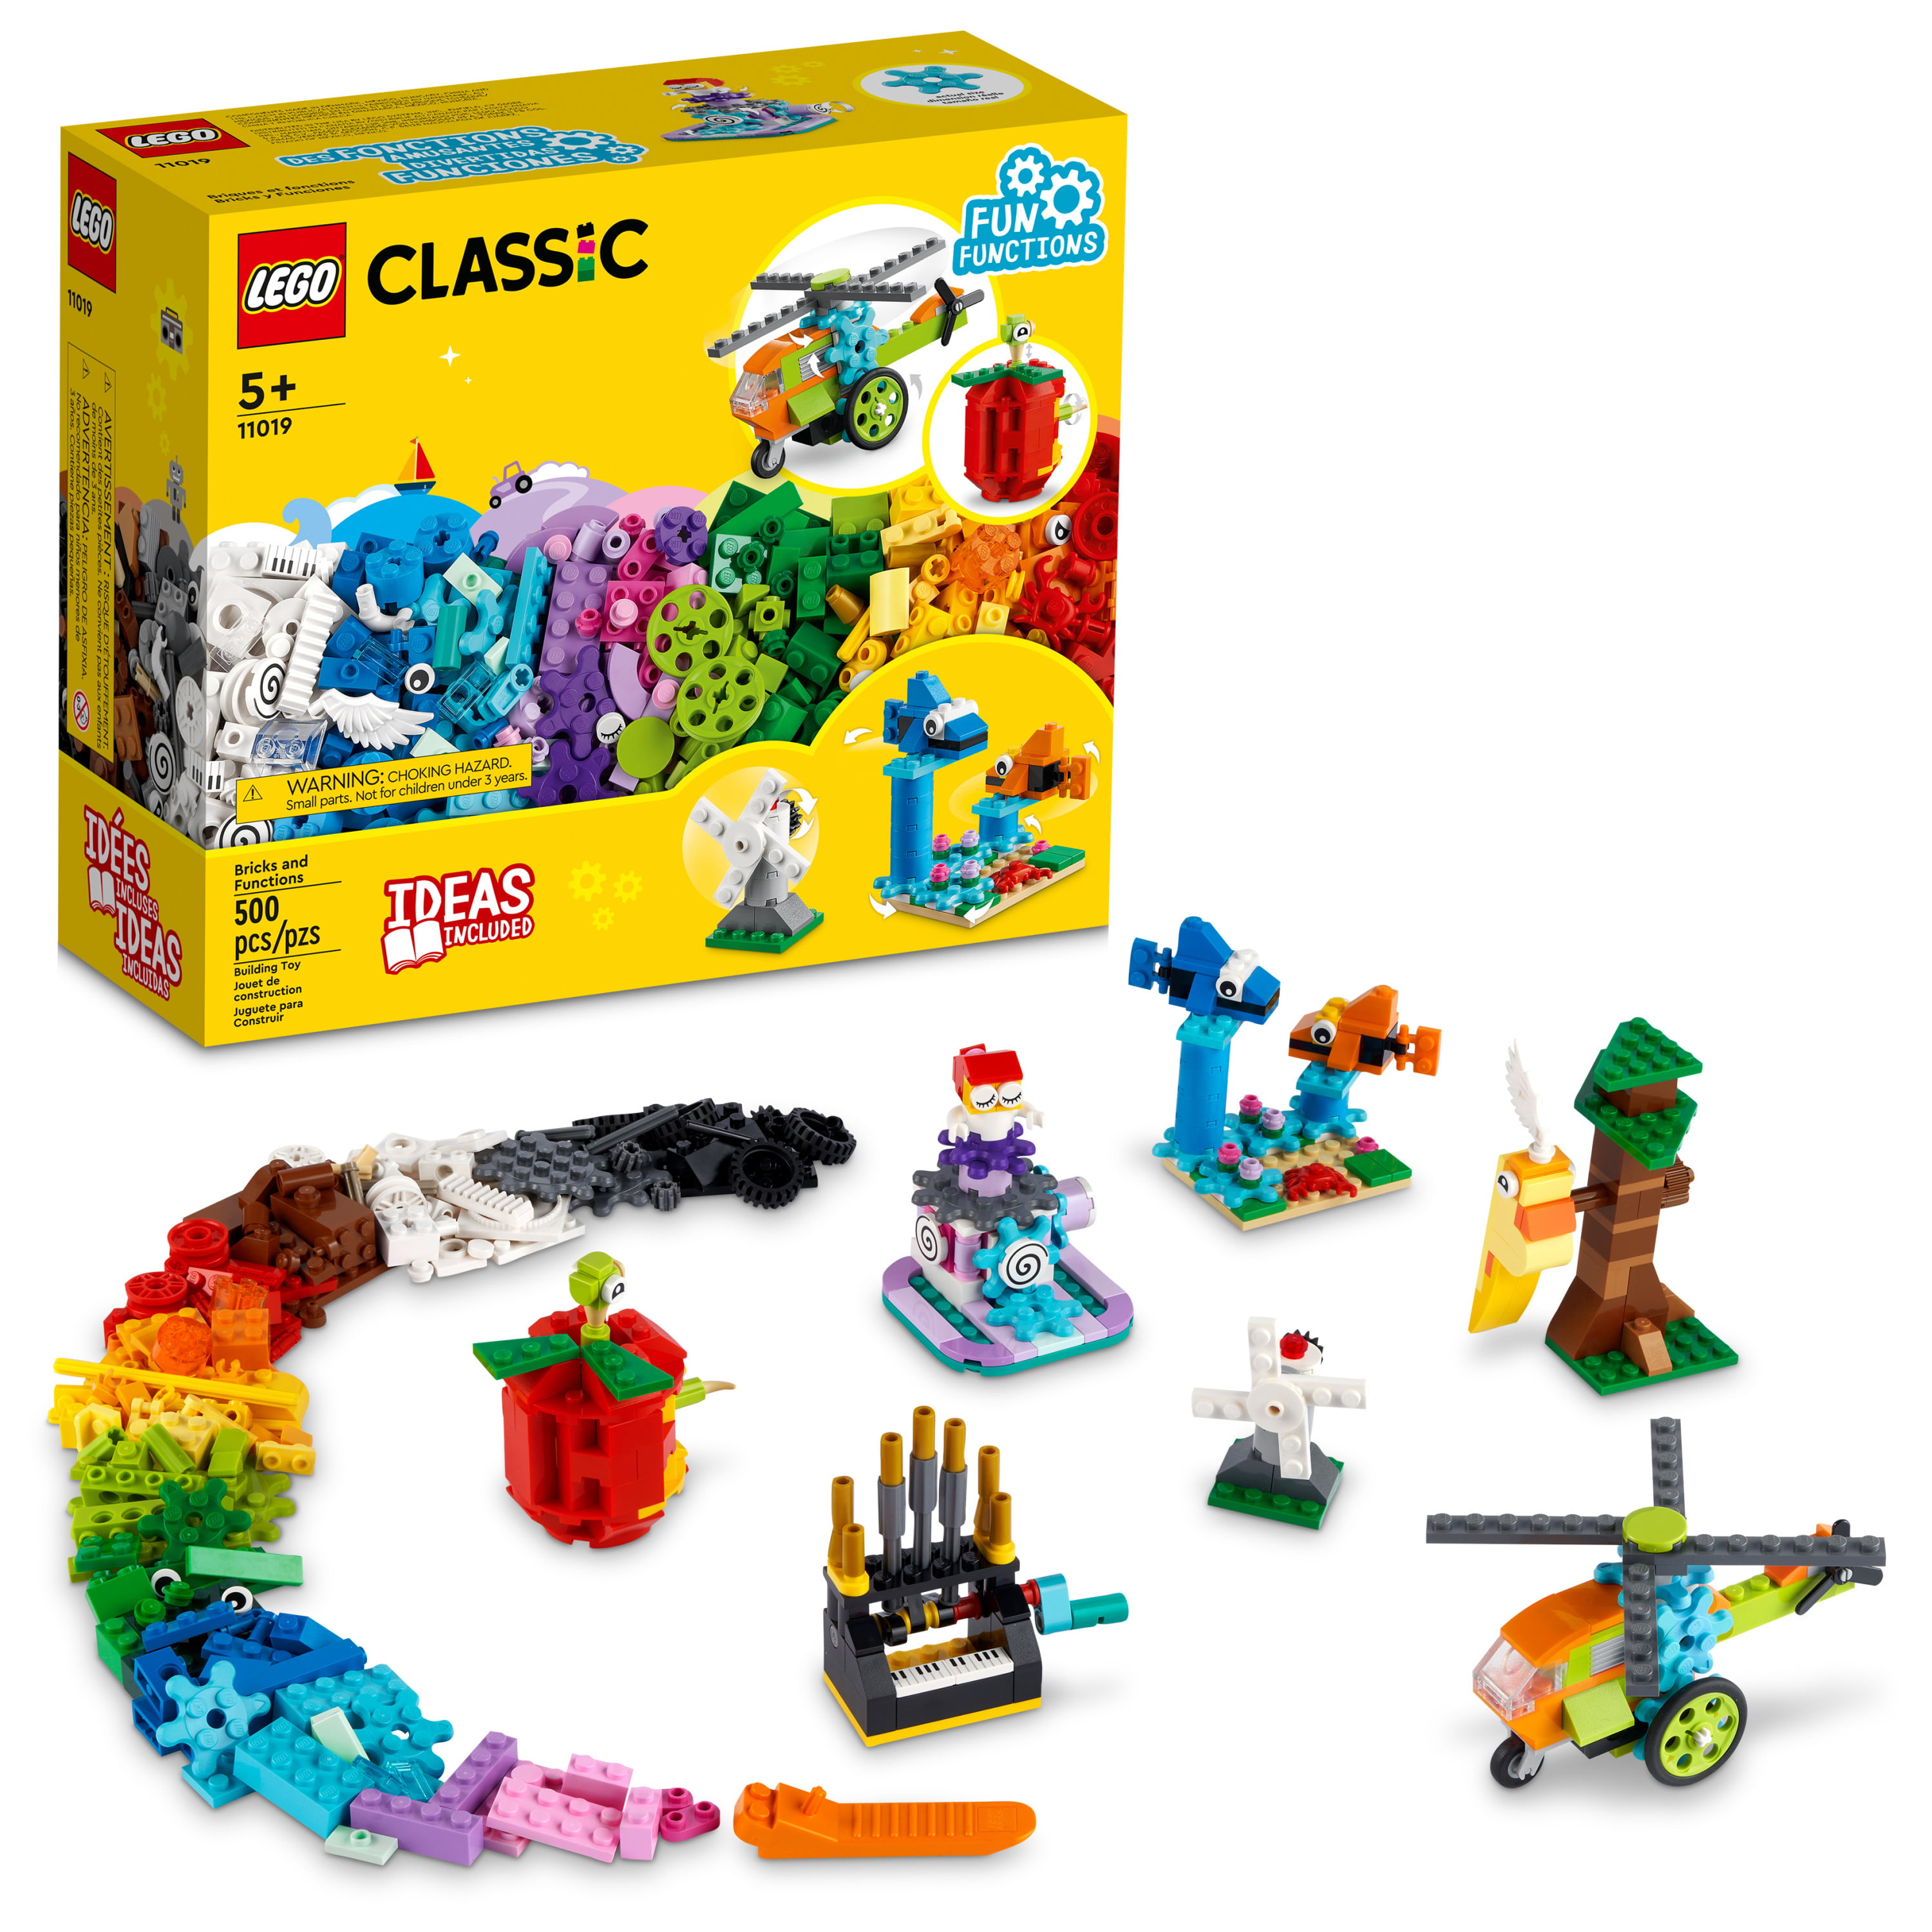 Seven multicolor LEGO builds from the LEGO Classics Bricks and Functions Set next to various LEGO pieces and the box packaging.